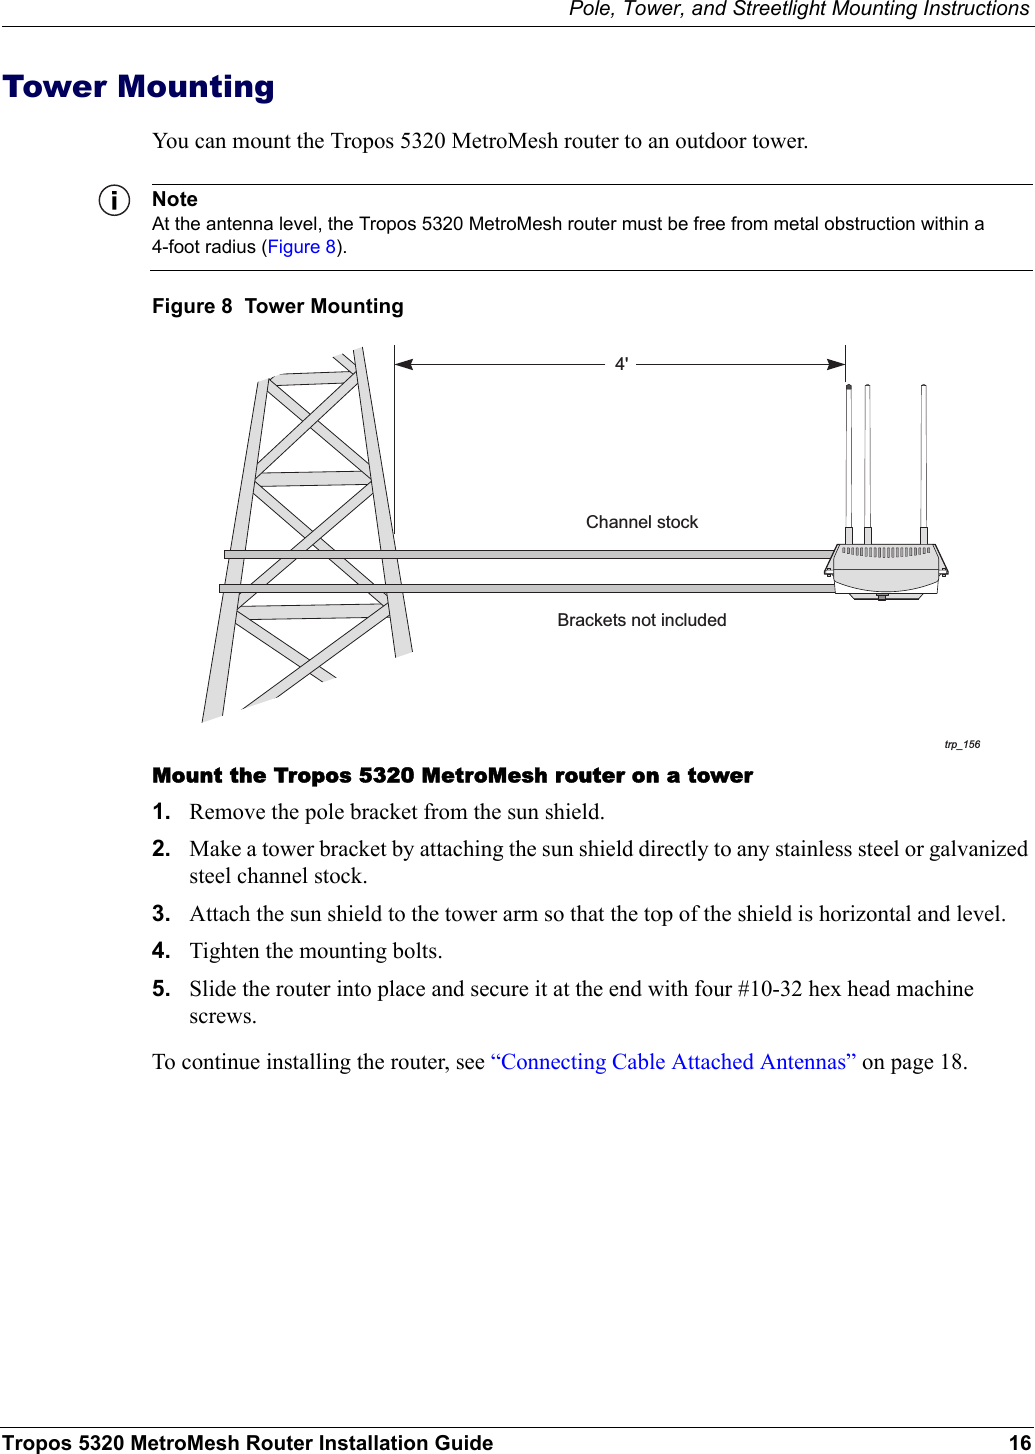 Pole, Tower, and Streetlight Mounting InstructionsTropos 5320 MetroMesh Router Installation Guide 16Tower MountingYou can mount the Tropos 5320 MetroMesh router to an outdoor tower. NoteAt the antenna level, the Tropos 5320 MetroMesh router must be free from metal obstruction within a 4-foot radius (Figure 8).Figure 8  Tower MountingMount the Tropos 5320 MetroMesh router on a tower1. Remove the pole bracket from the sun shield.2. Make a tower bracket by attaching the sun shield directly to any stainless steel or galvanized steel channel stock. 3. Attach the sun shield to the tower arm so that the top of the shield is horizontal and level.4. Tighten the mounting bolts.5. Slide the router into place and secure it at the end with four #10-32 hex head machine screws.To continue installing the router, see “Connecting Cable Attached Antennas” on page 18.trp_1564&apos;Brackets not includedChannel stock